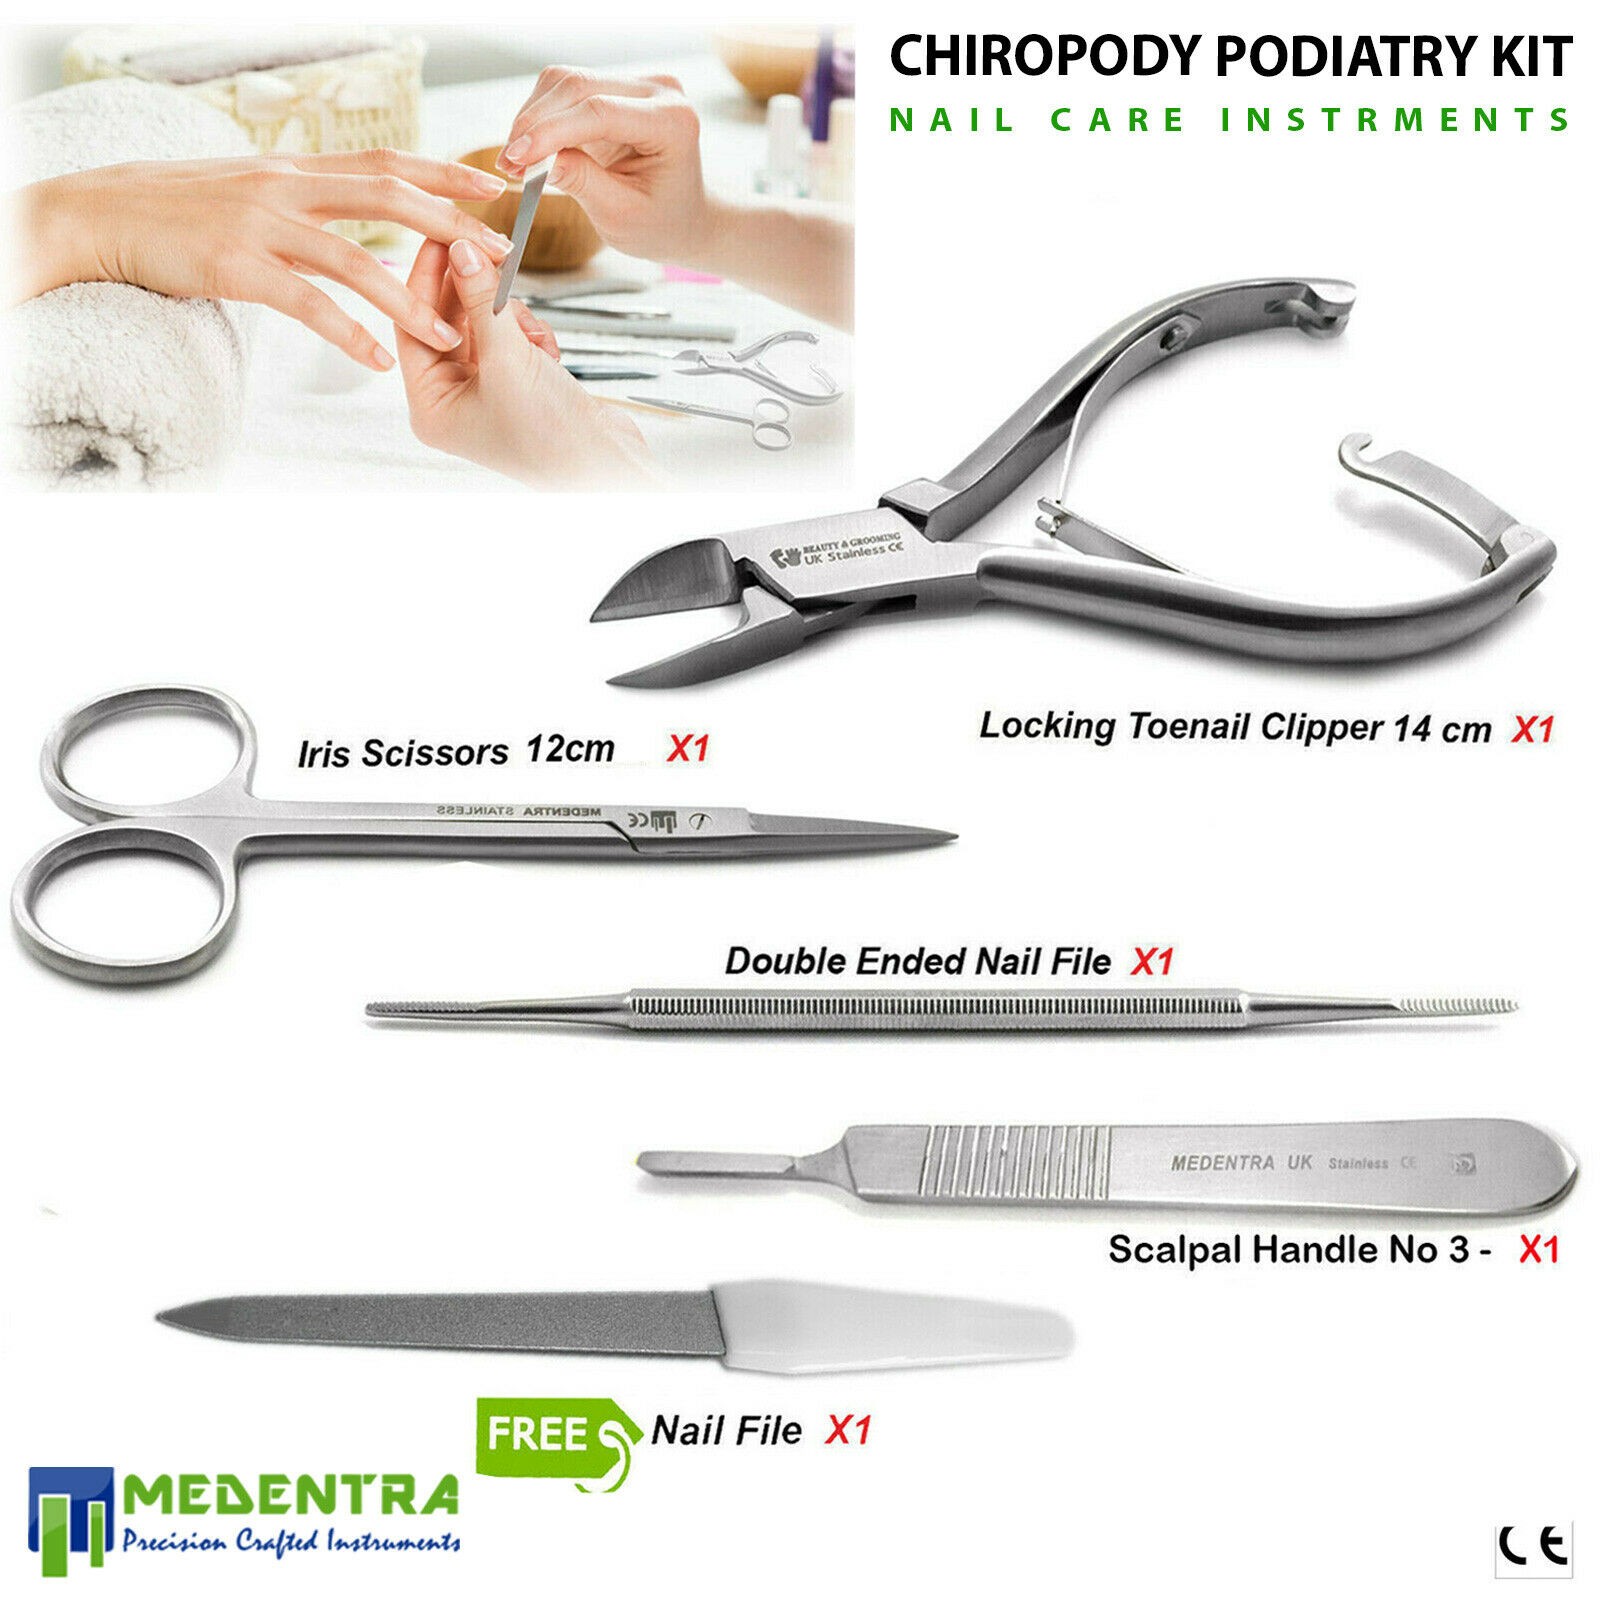 Professional Podiatry Kit of Clippers Ingrown Nail File Thick Toenail Nippers CE